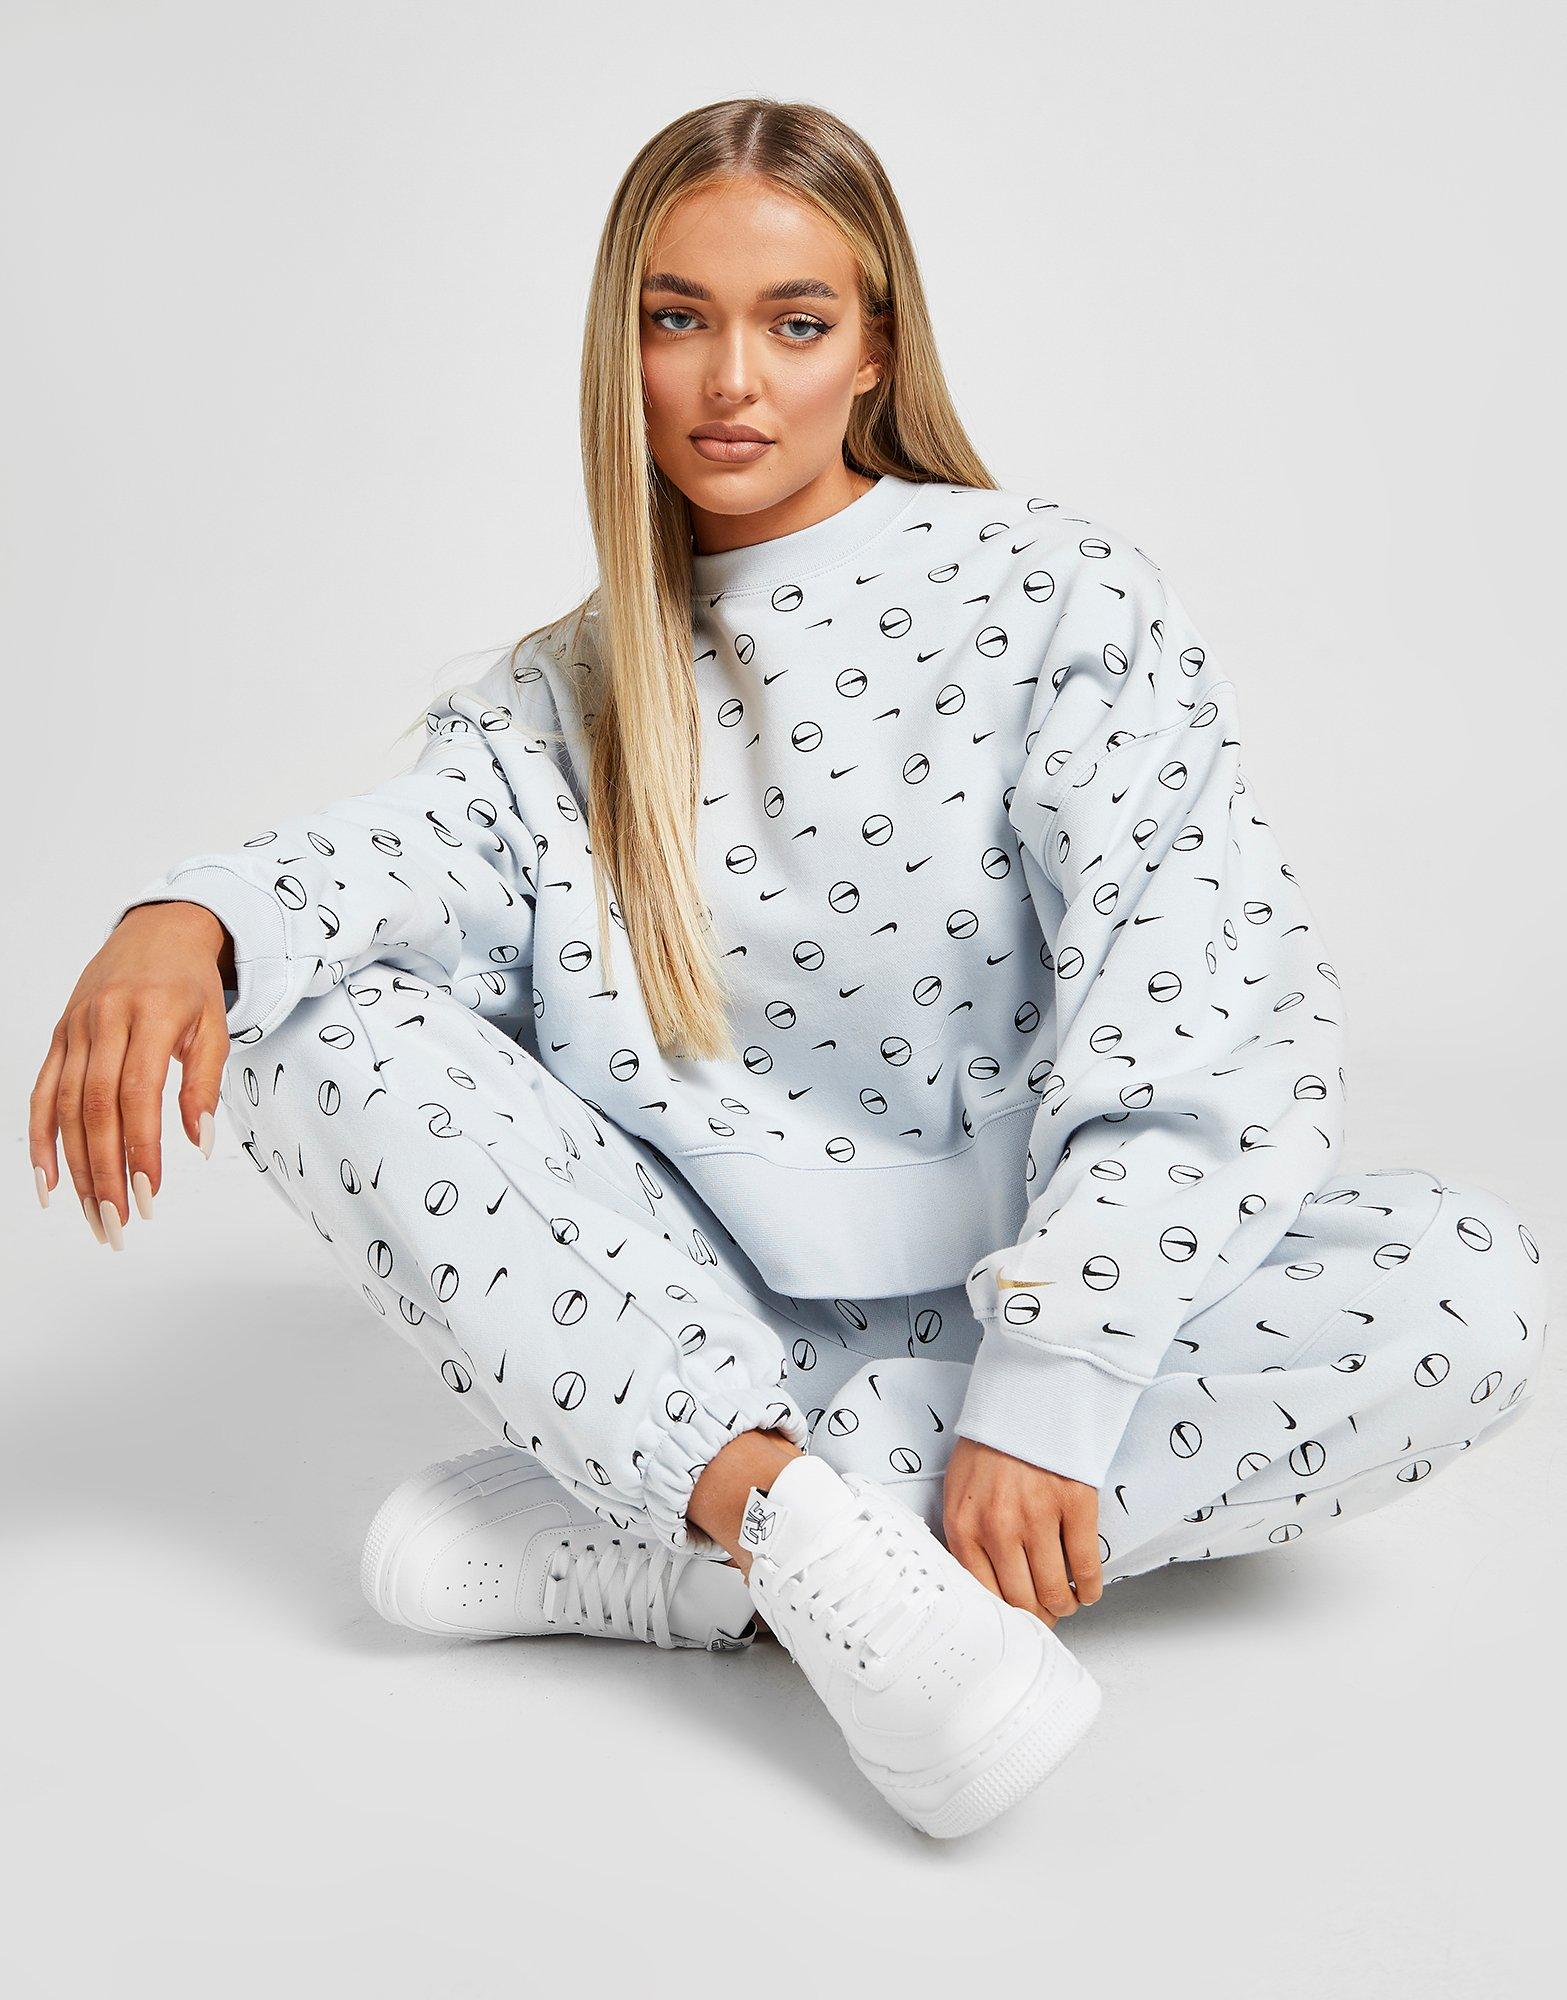 nike all over print crew tracksuit